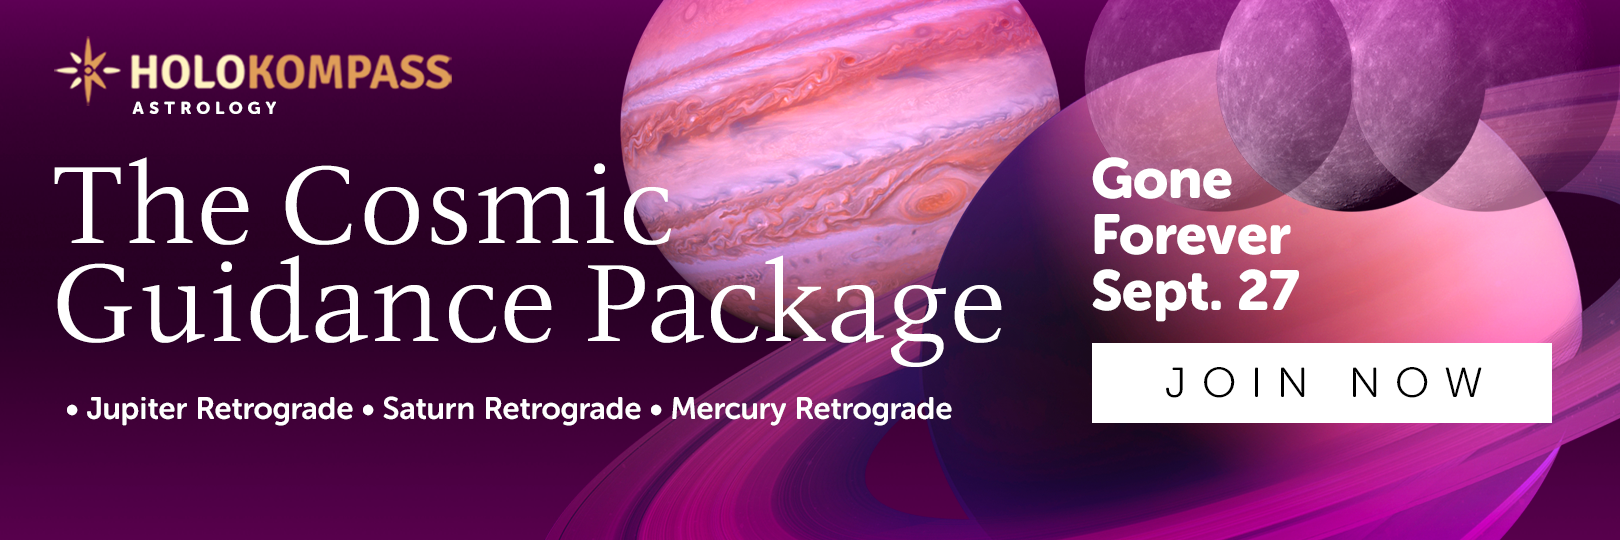 The Cosmic Guidance Package - Gone Forever Sept. 27! Join Now